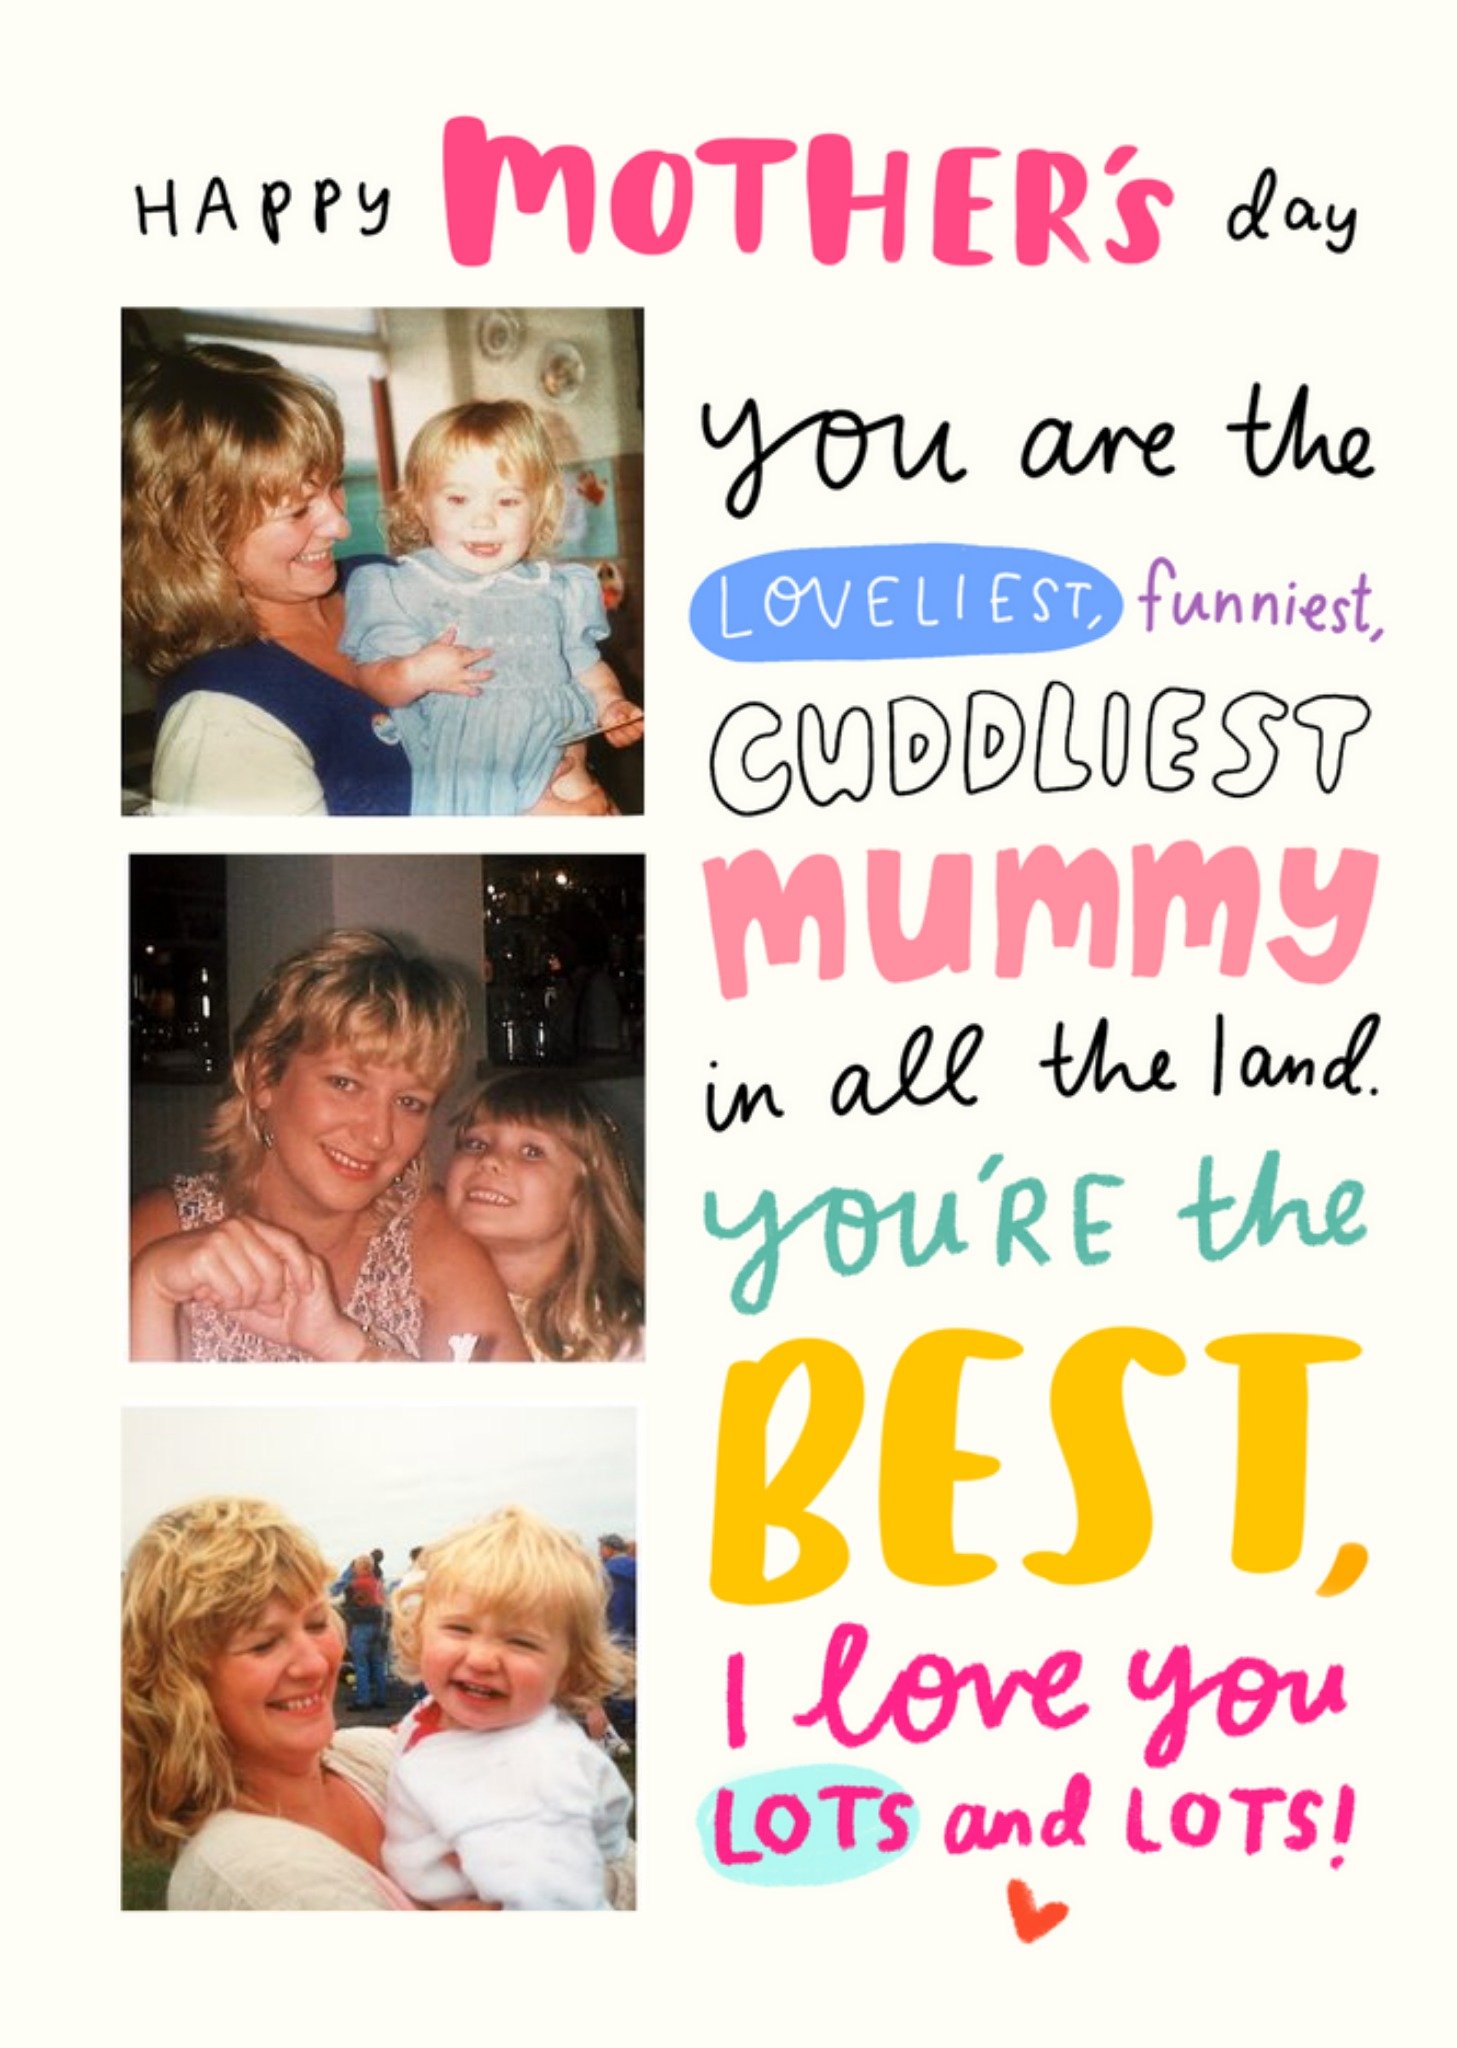 Moonpig Cute Typographic Sentimental Verse Photo Upload Mother's Day Card, Large